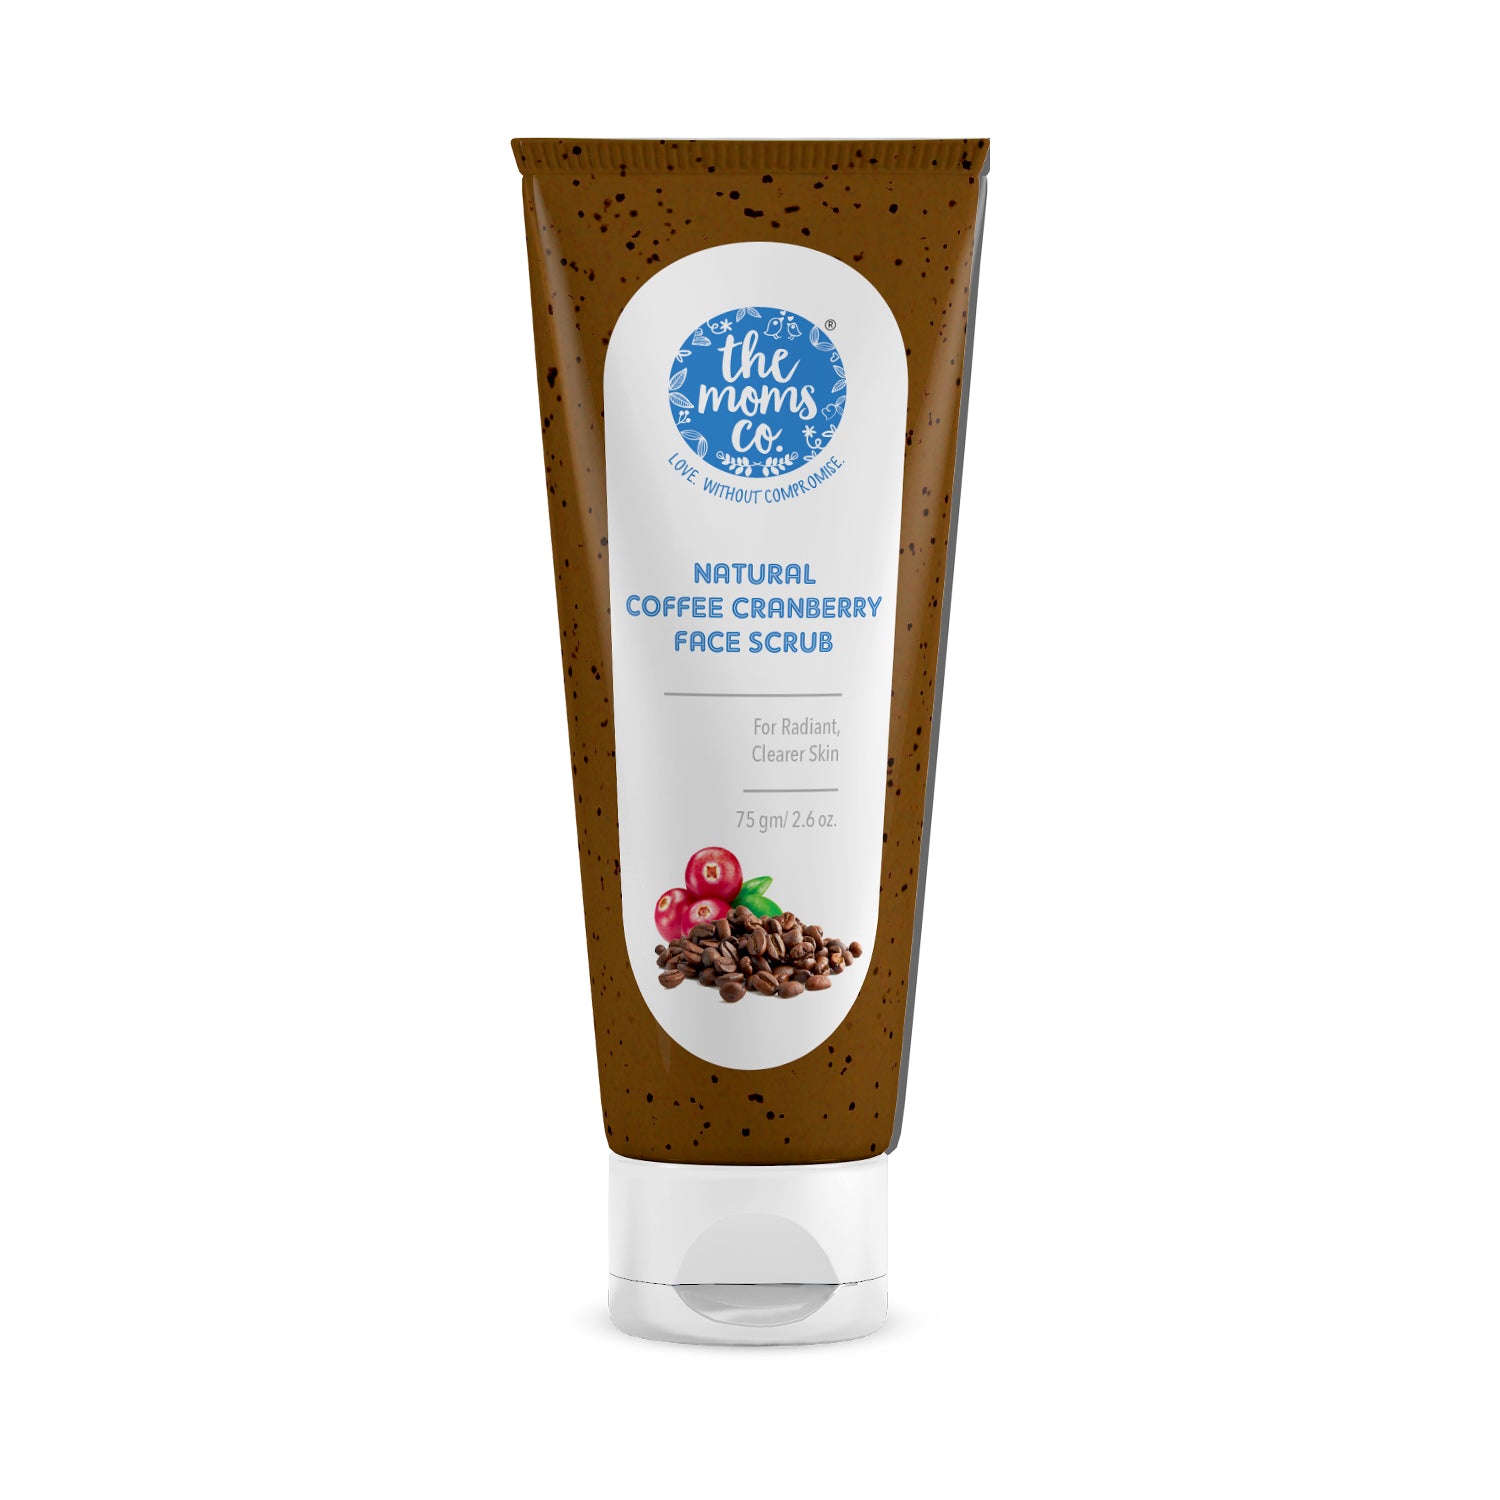 The Moms Co Natural Cranberry Coffee Face Scrub for Radiant and Clearer Skin with Cranberry , Coffee and Vitamin C (75gms)